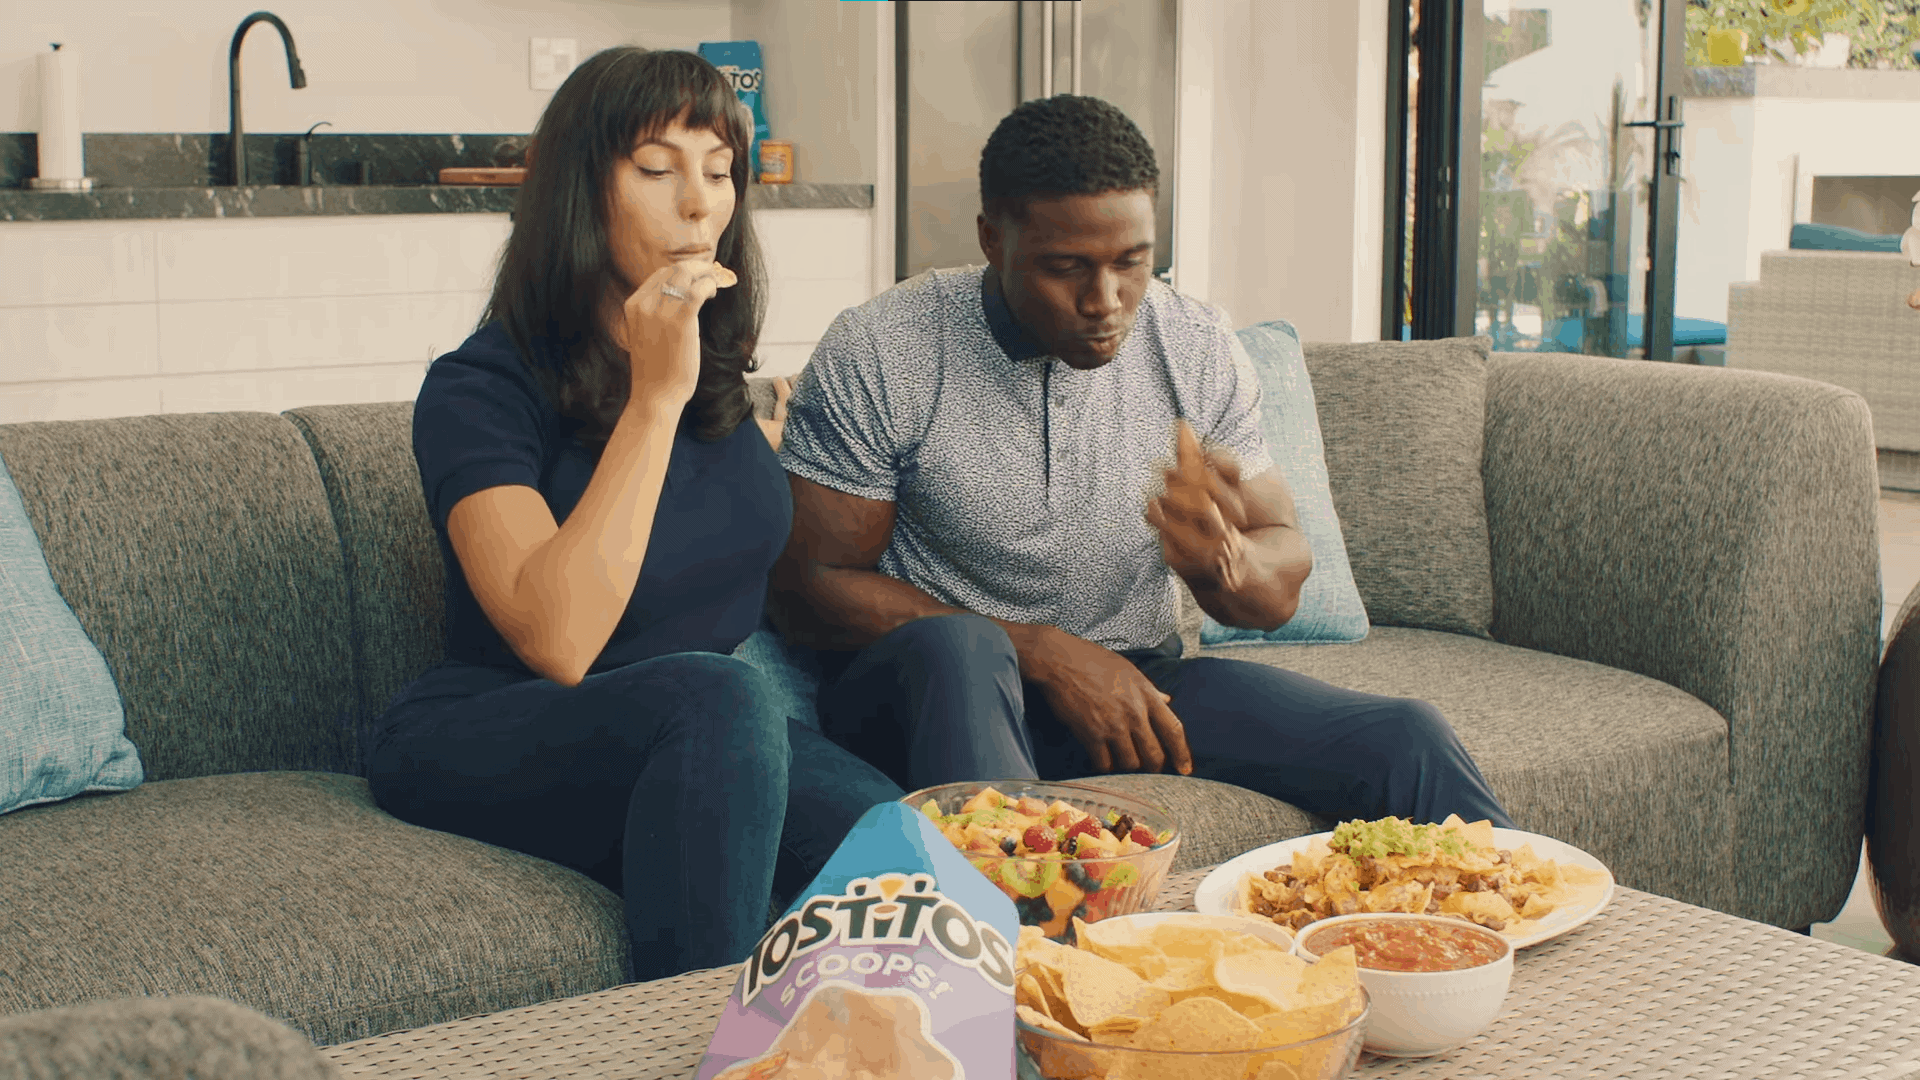 Tostitos Promotes Chips With Bi-Racial Couple In New Advertisement Campaign